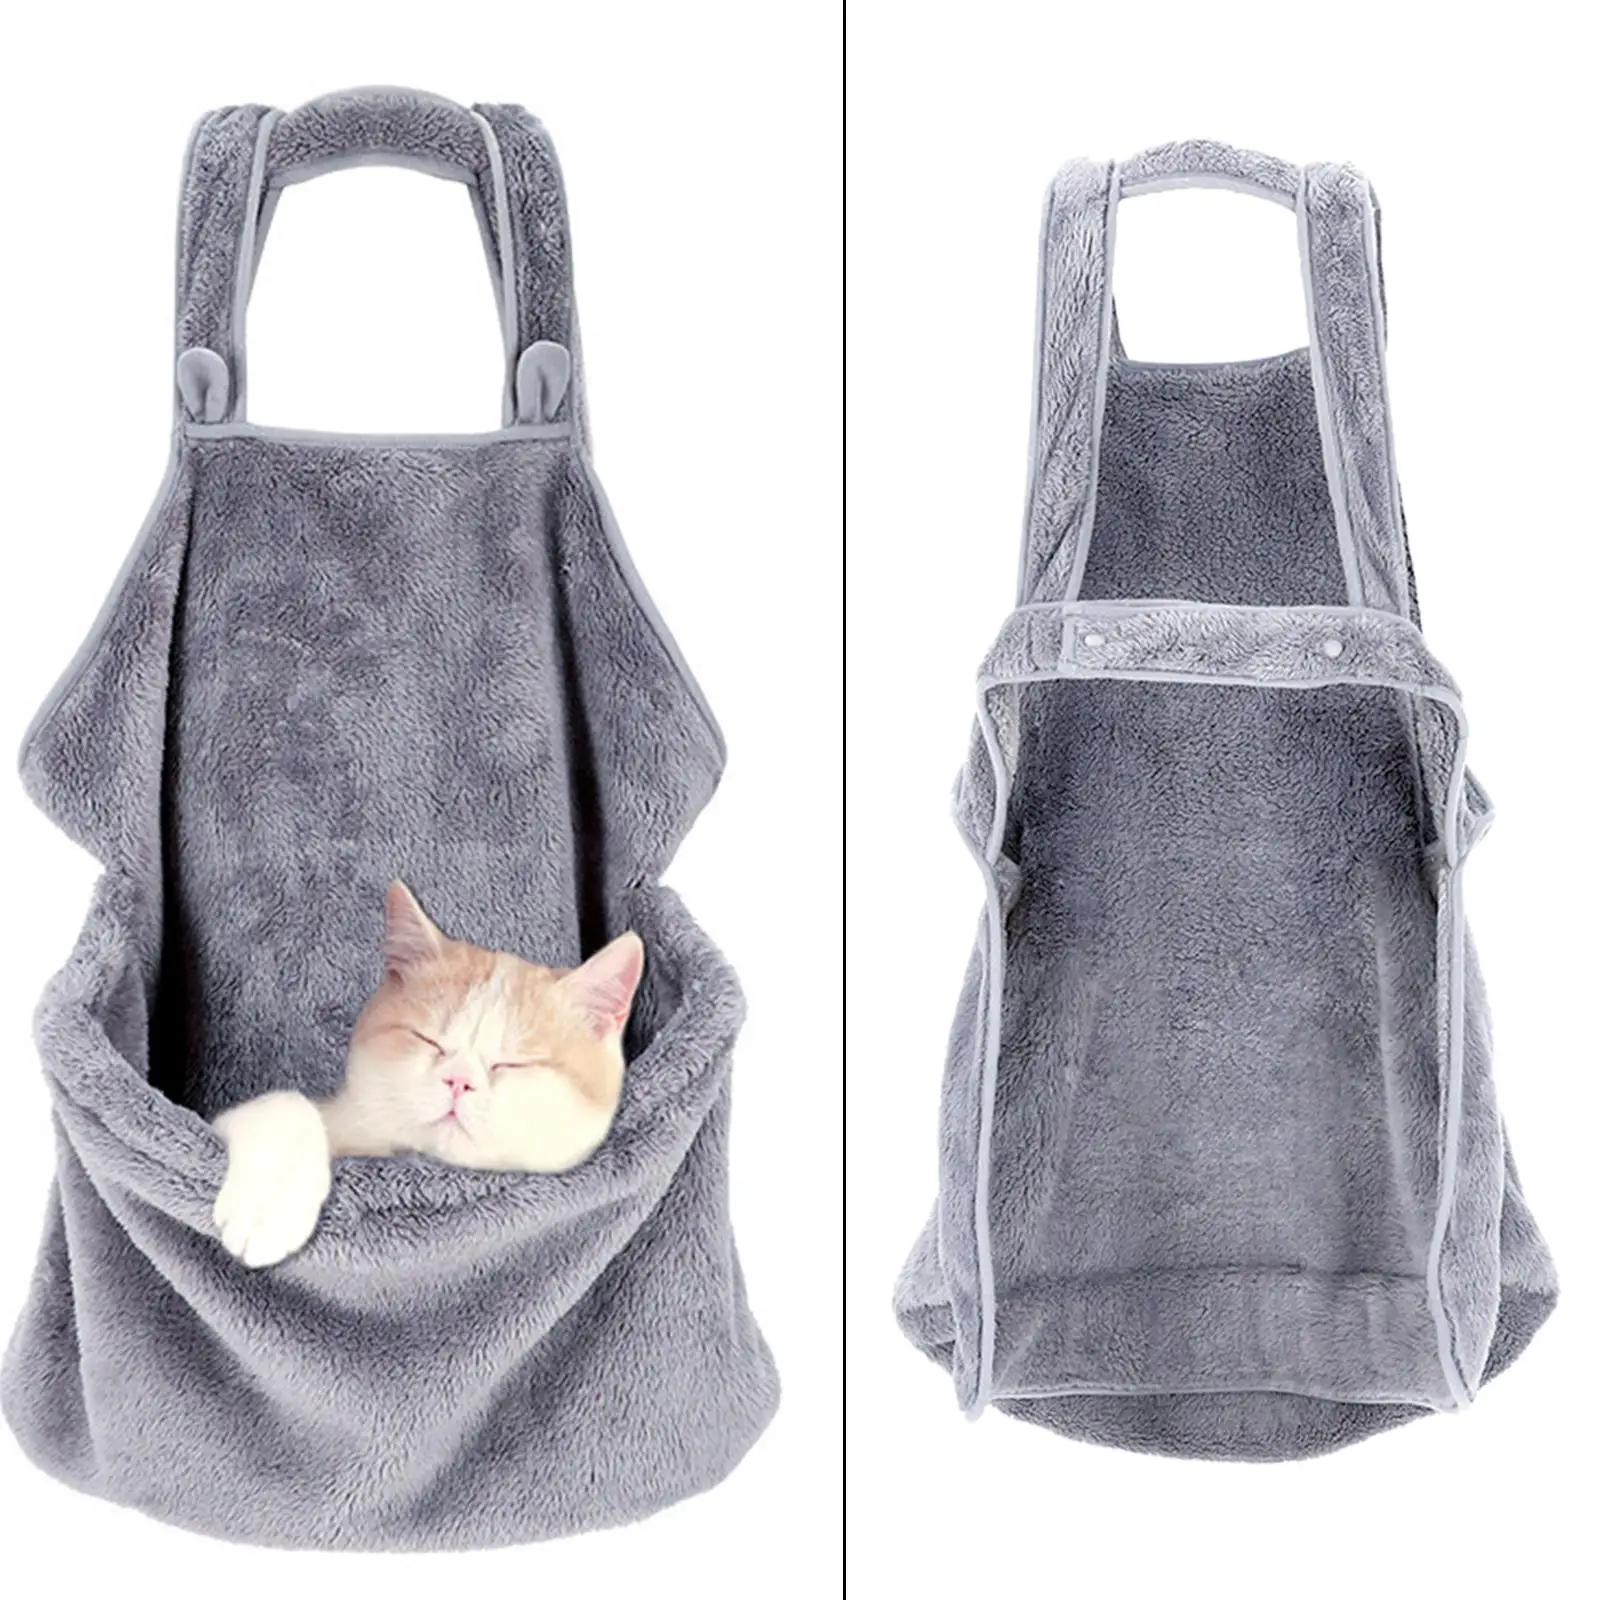 Cat Holder Carrier Apron Soft Coral Velvet Pet Sleeping Chest Apron with Pocket Hands-Free Bag for Holding Pet Puppies Cats 